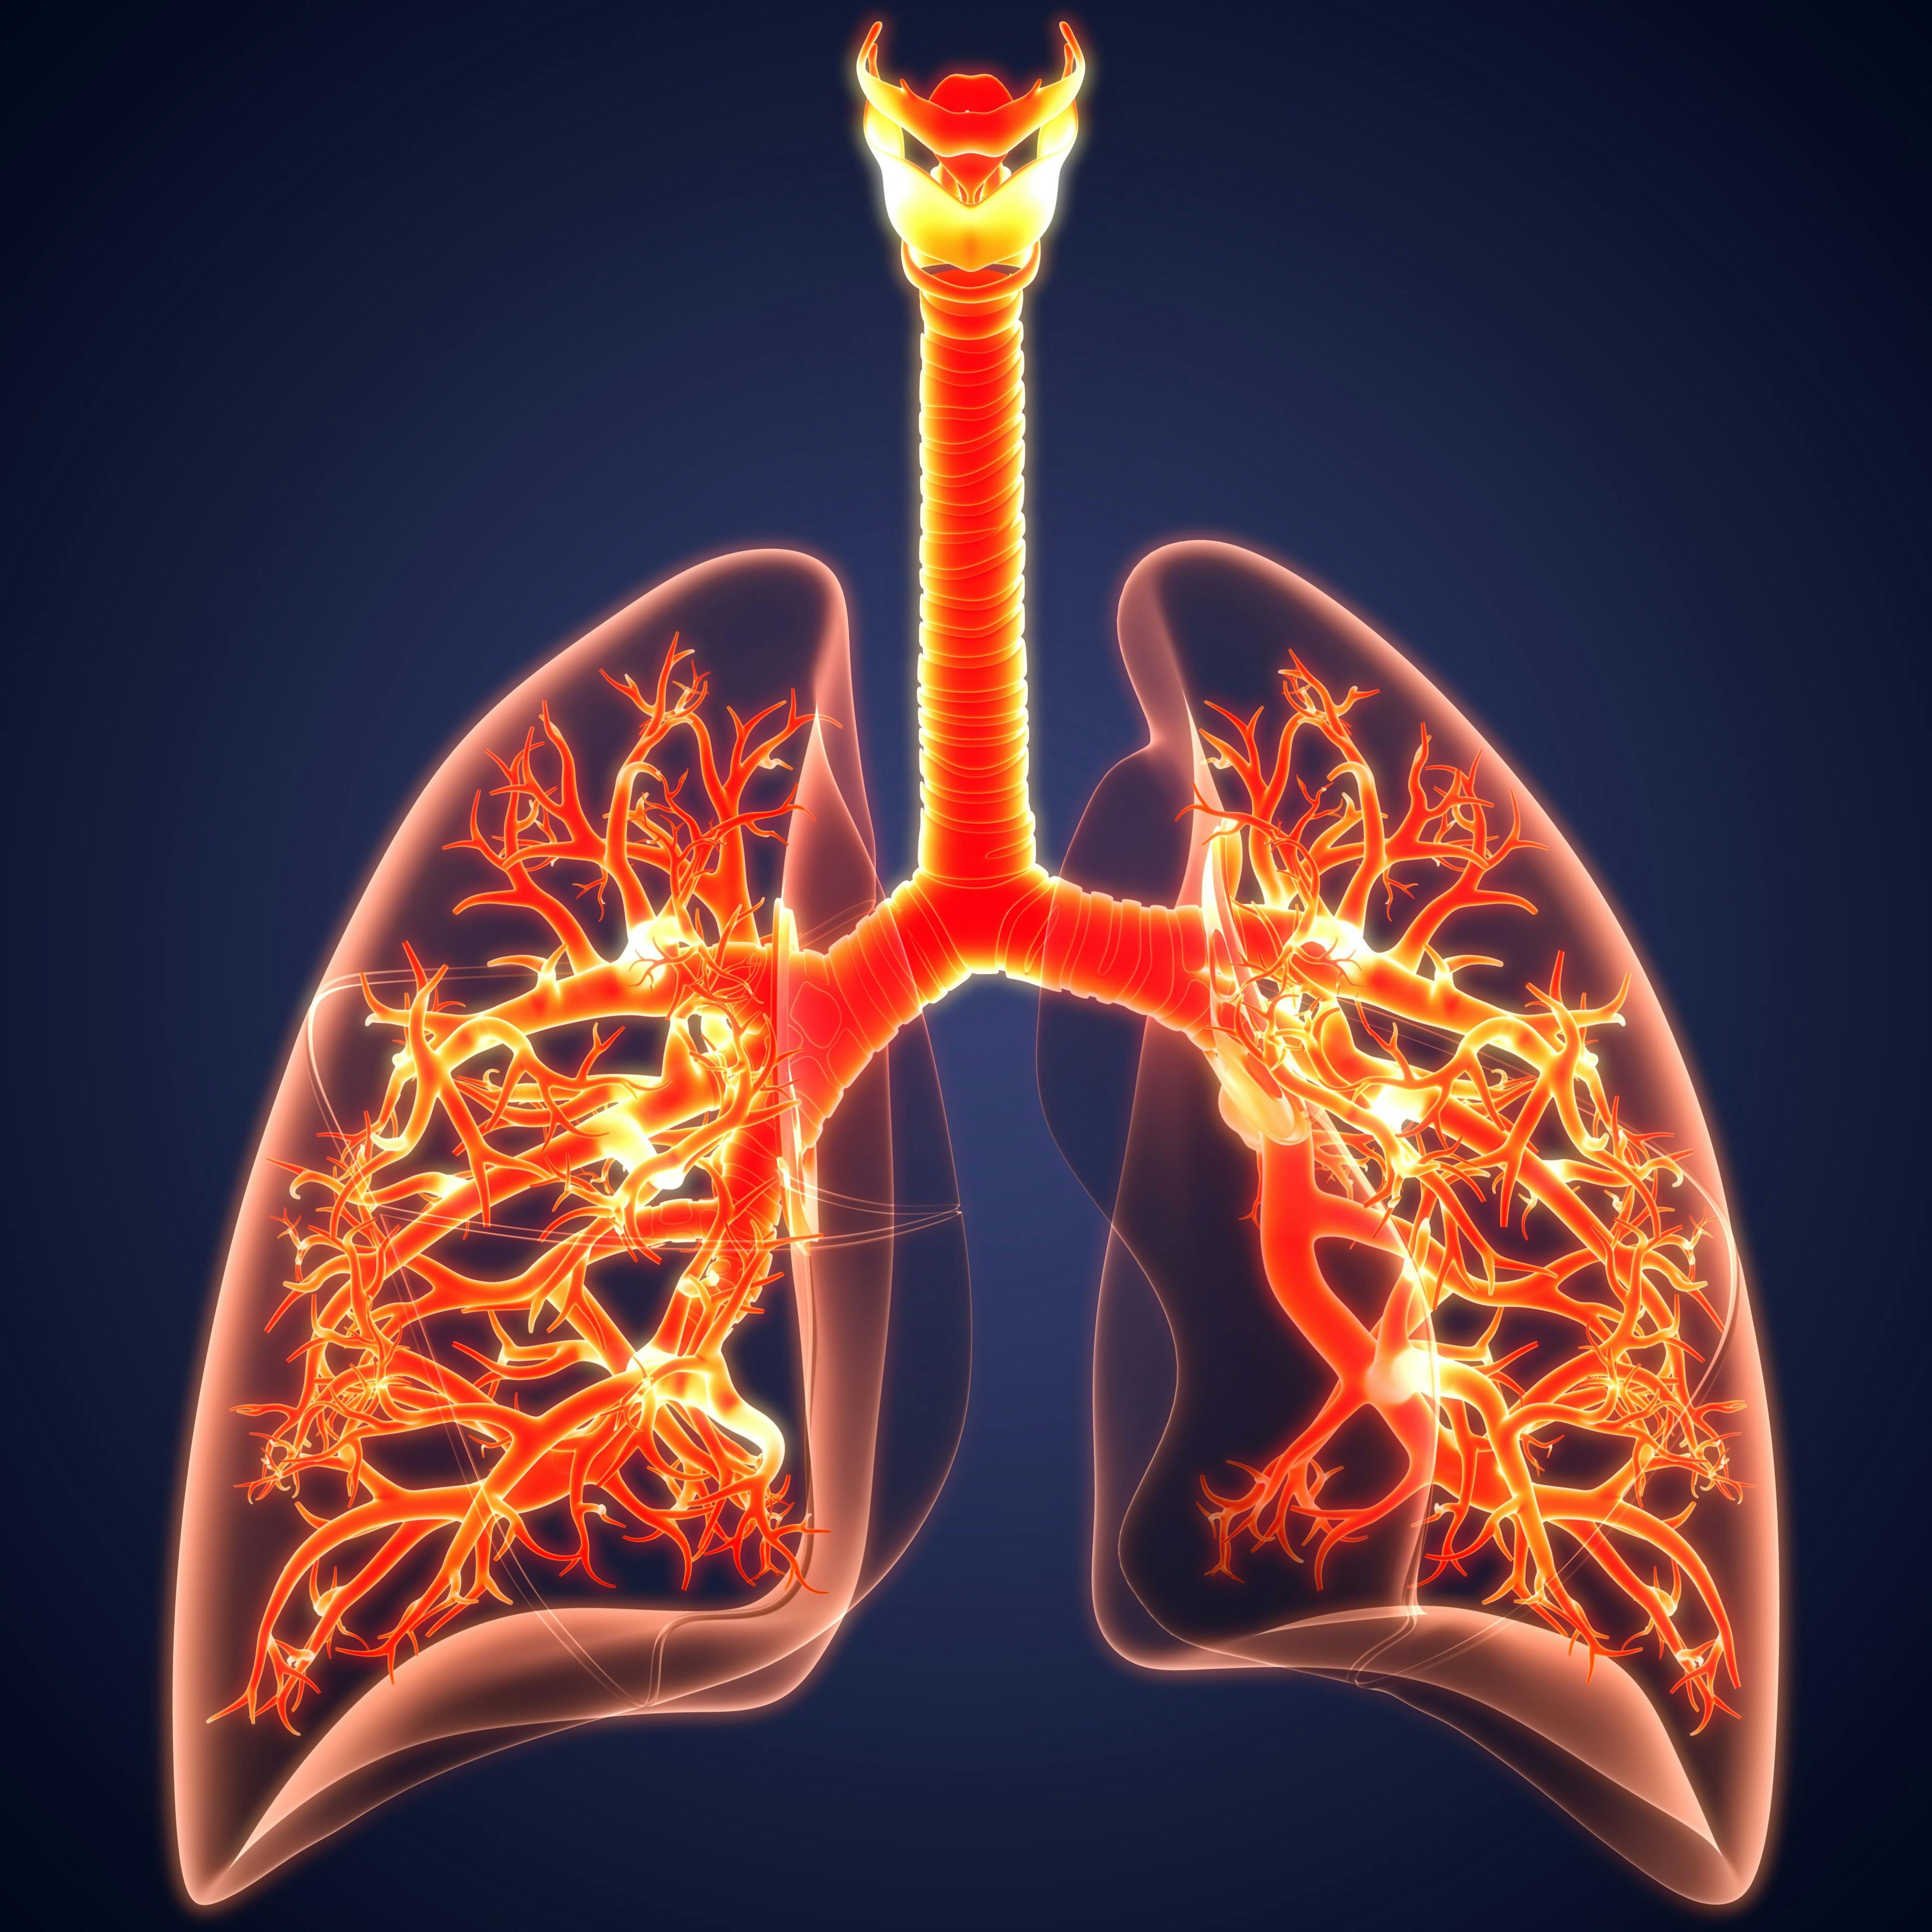 A Surge of Biologics for Severe Asthma